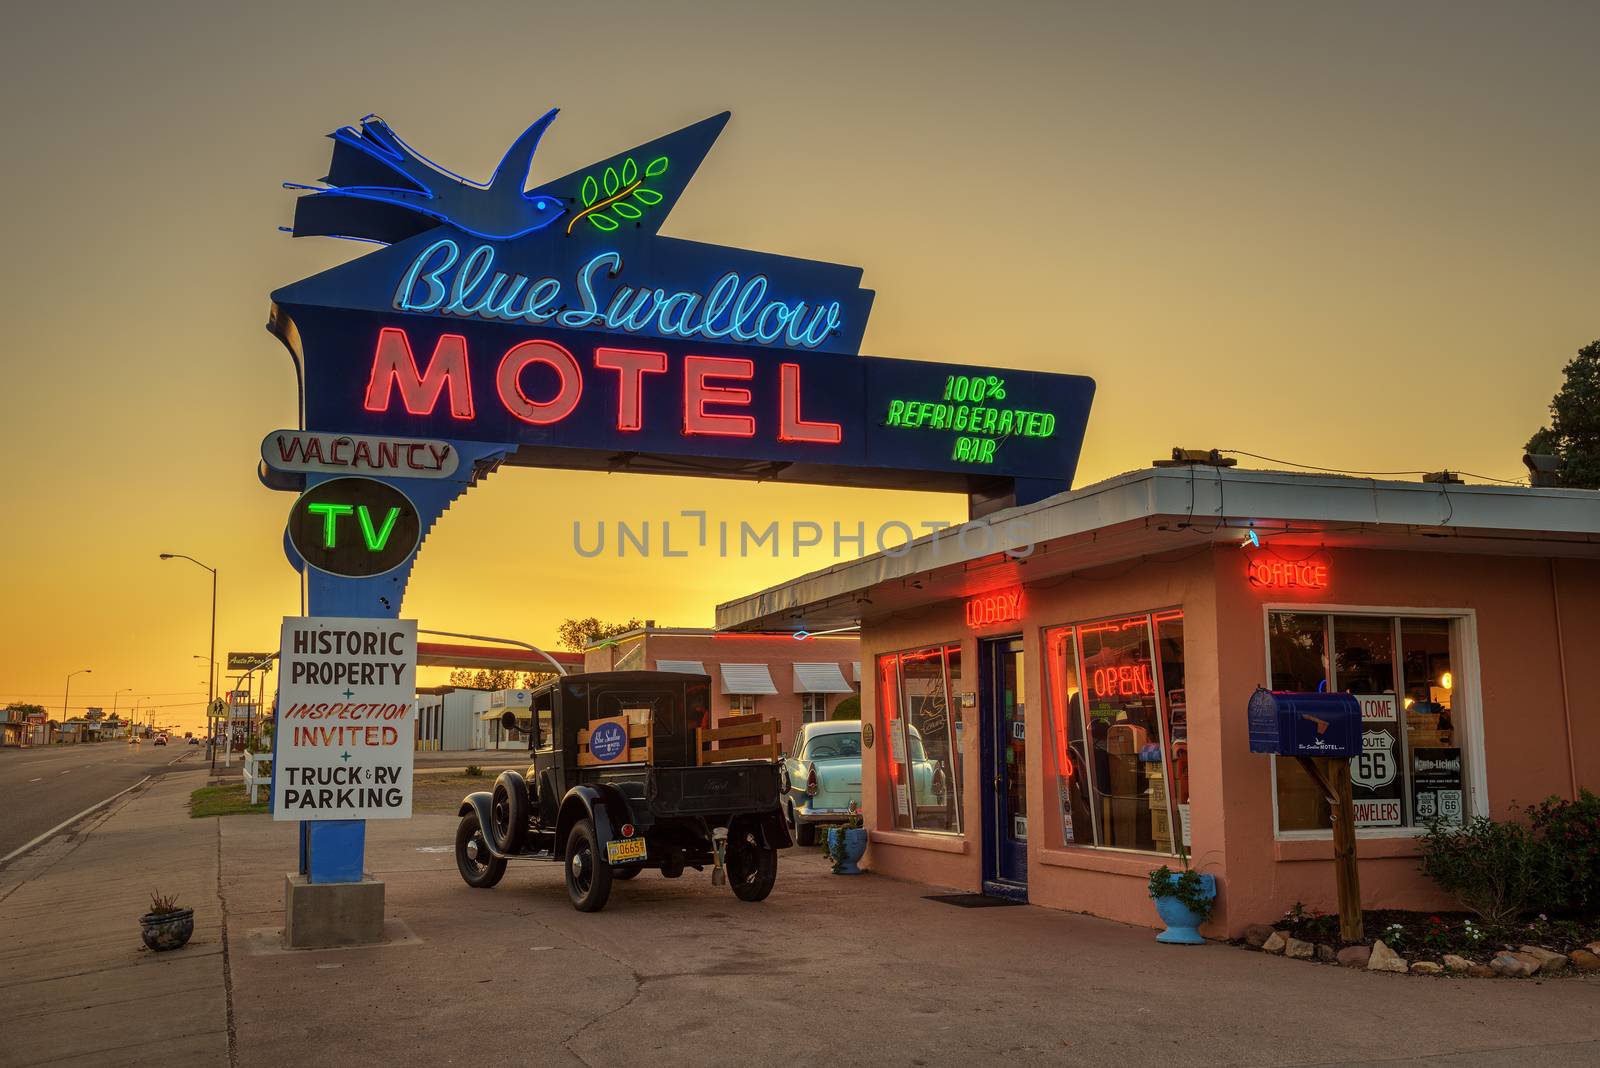 TUCUMCARI, NEW MEXICO - MAY 13, 2016 : Historic Blue Swallow Motel at sunset This building is listed on the National Register of Historic Places in New Mexico as a part of historic U.S. Route 66.